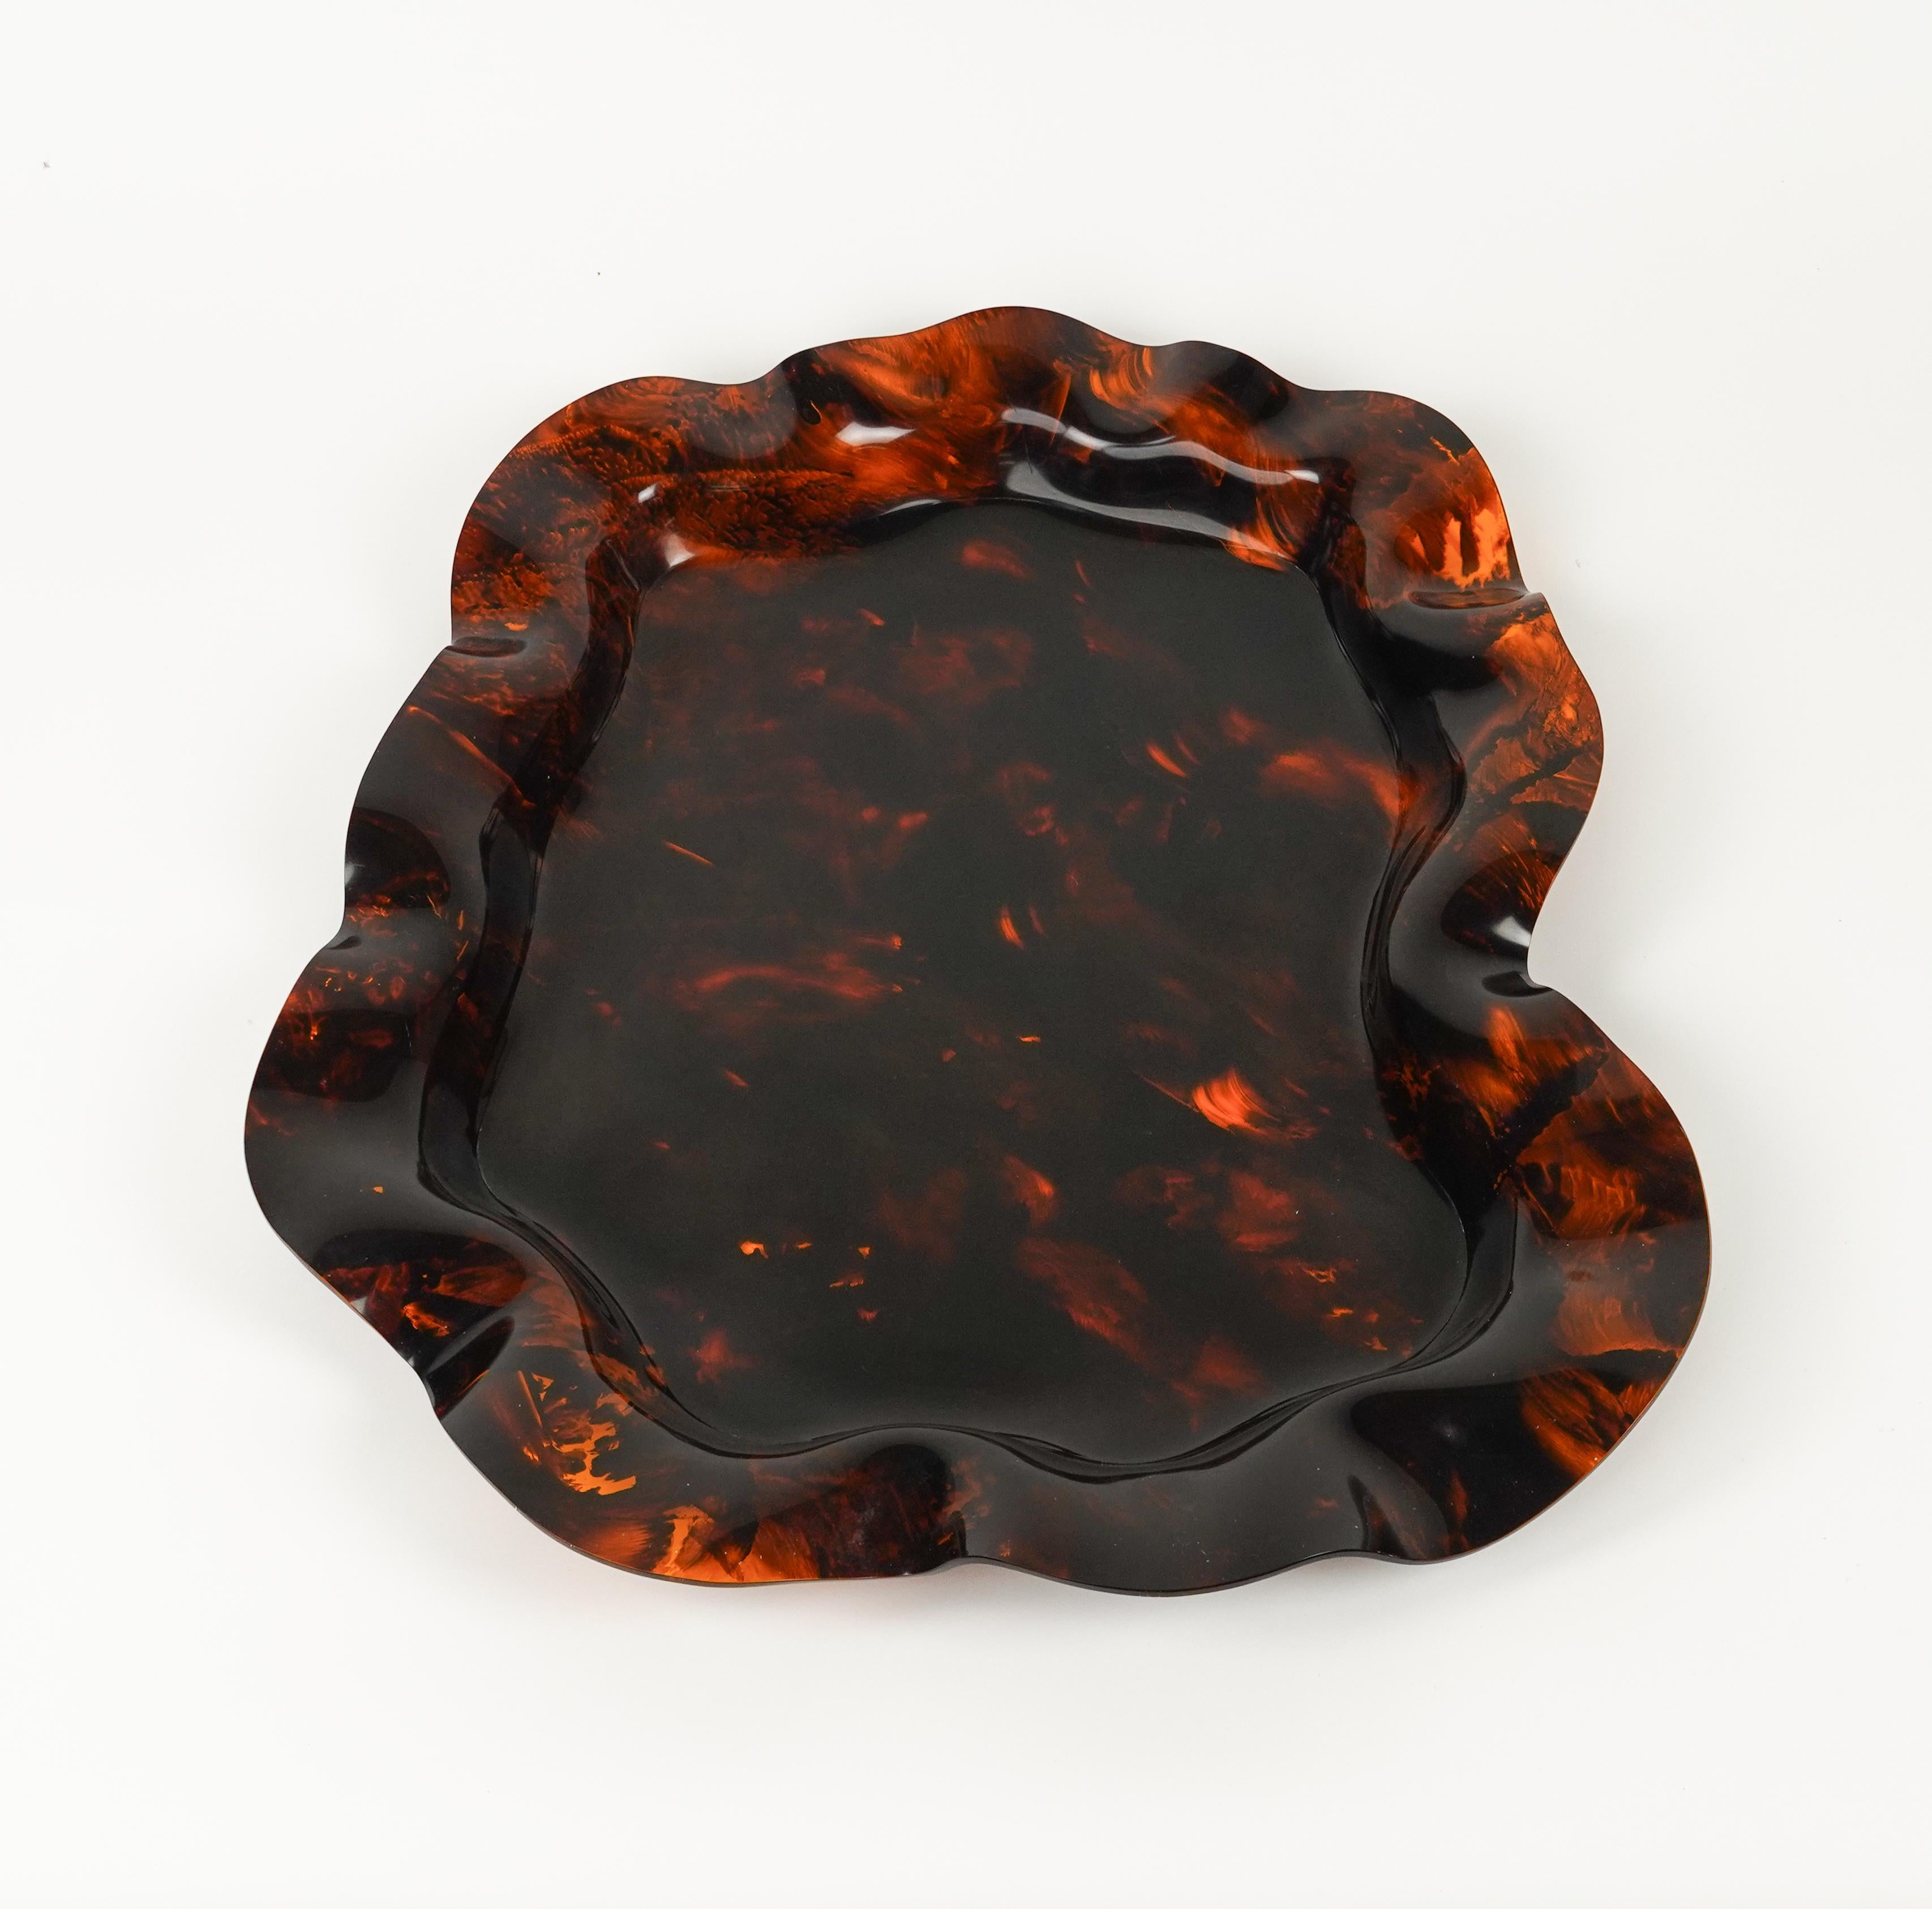 Italian Large Serving Tray or Centerpiece Lucite Faux Tortoiseshell, Italy 1970s For Sale